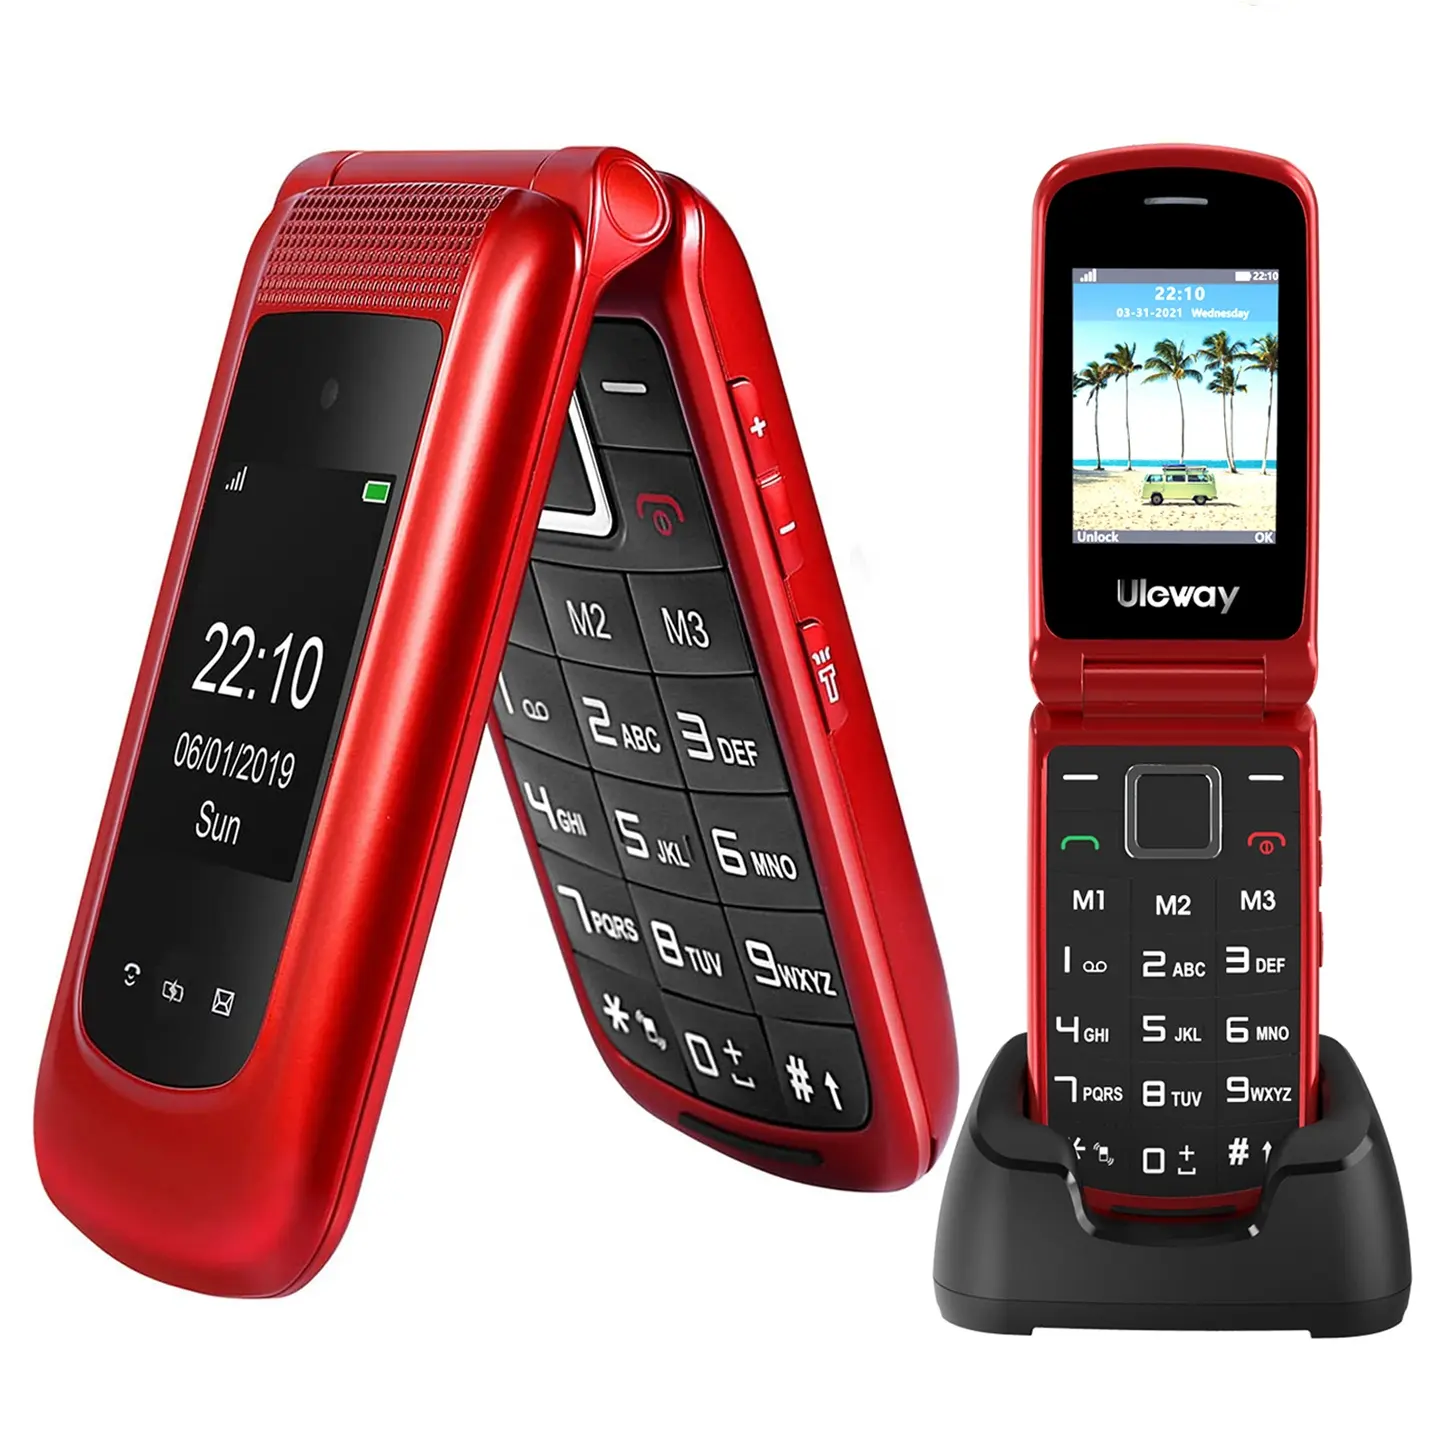 Factory High Quality Unlocked 4g Bar Cell Phone Flip 1.77+2.4'' Dual Display 4g Senior Mobile Phone Without Contract -Red